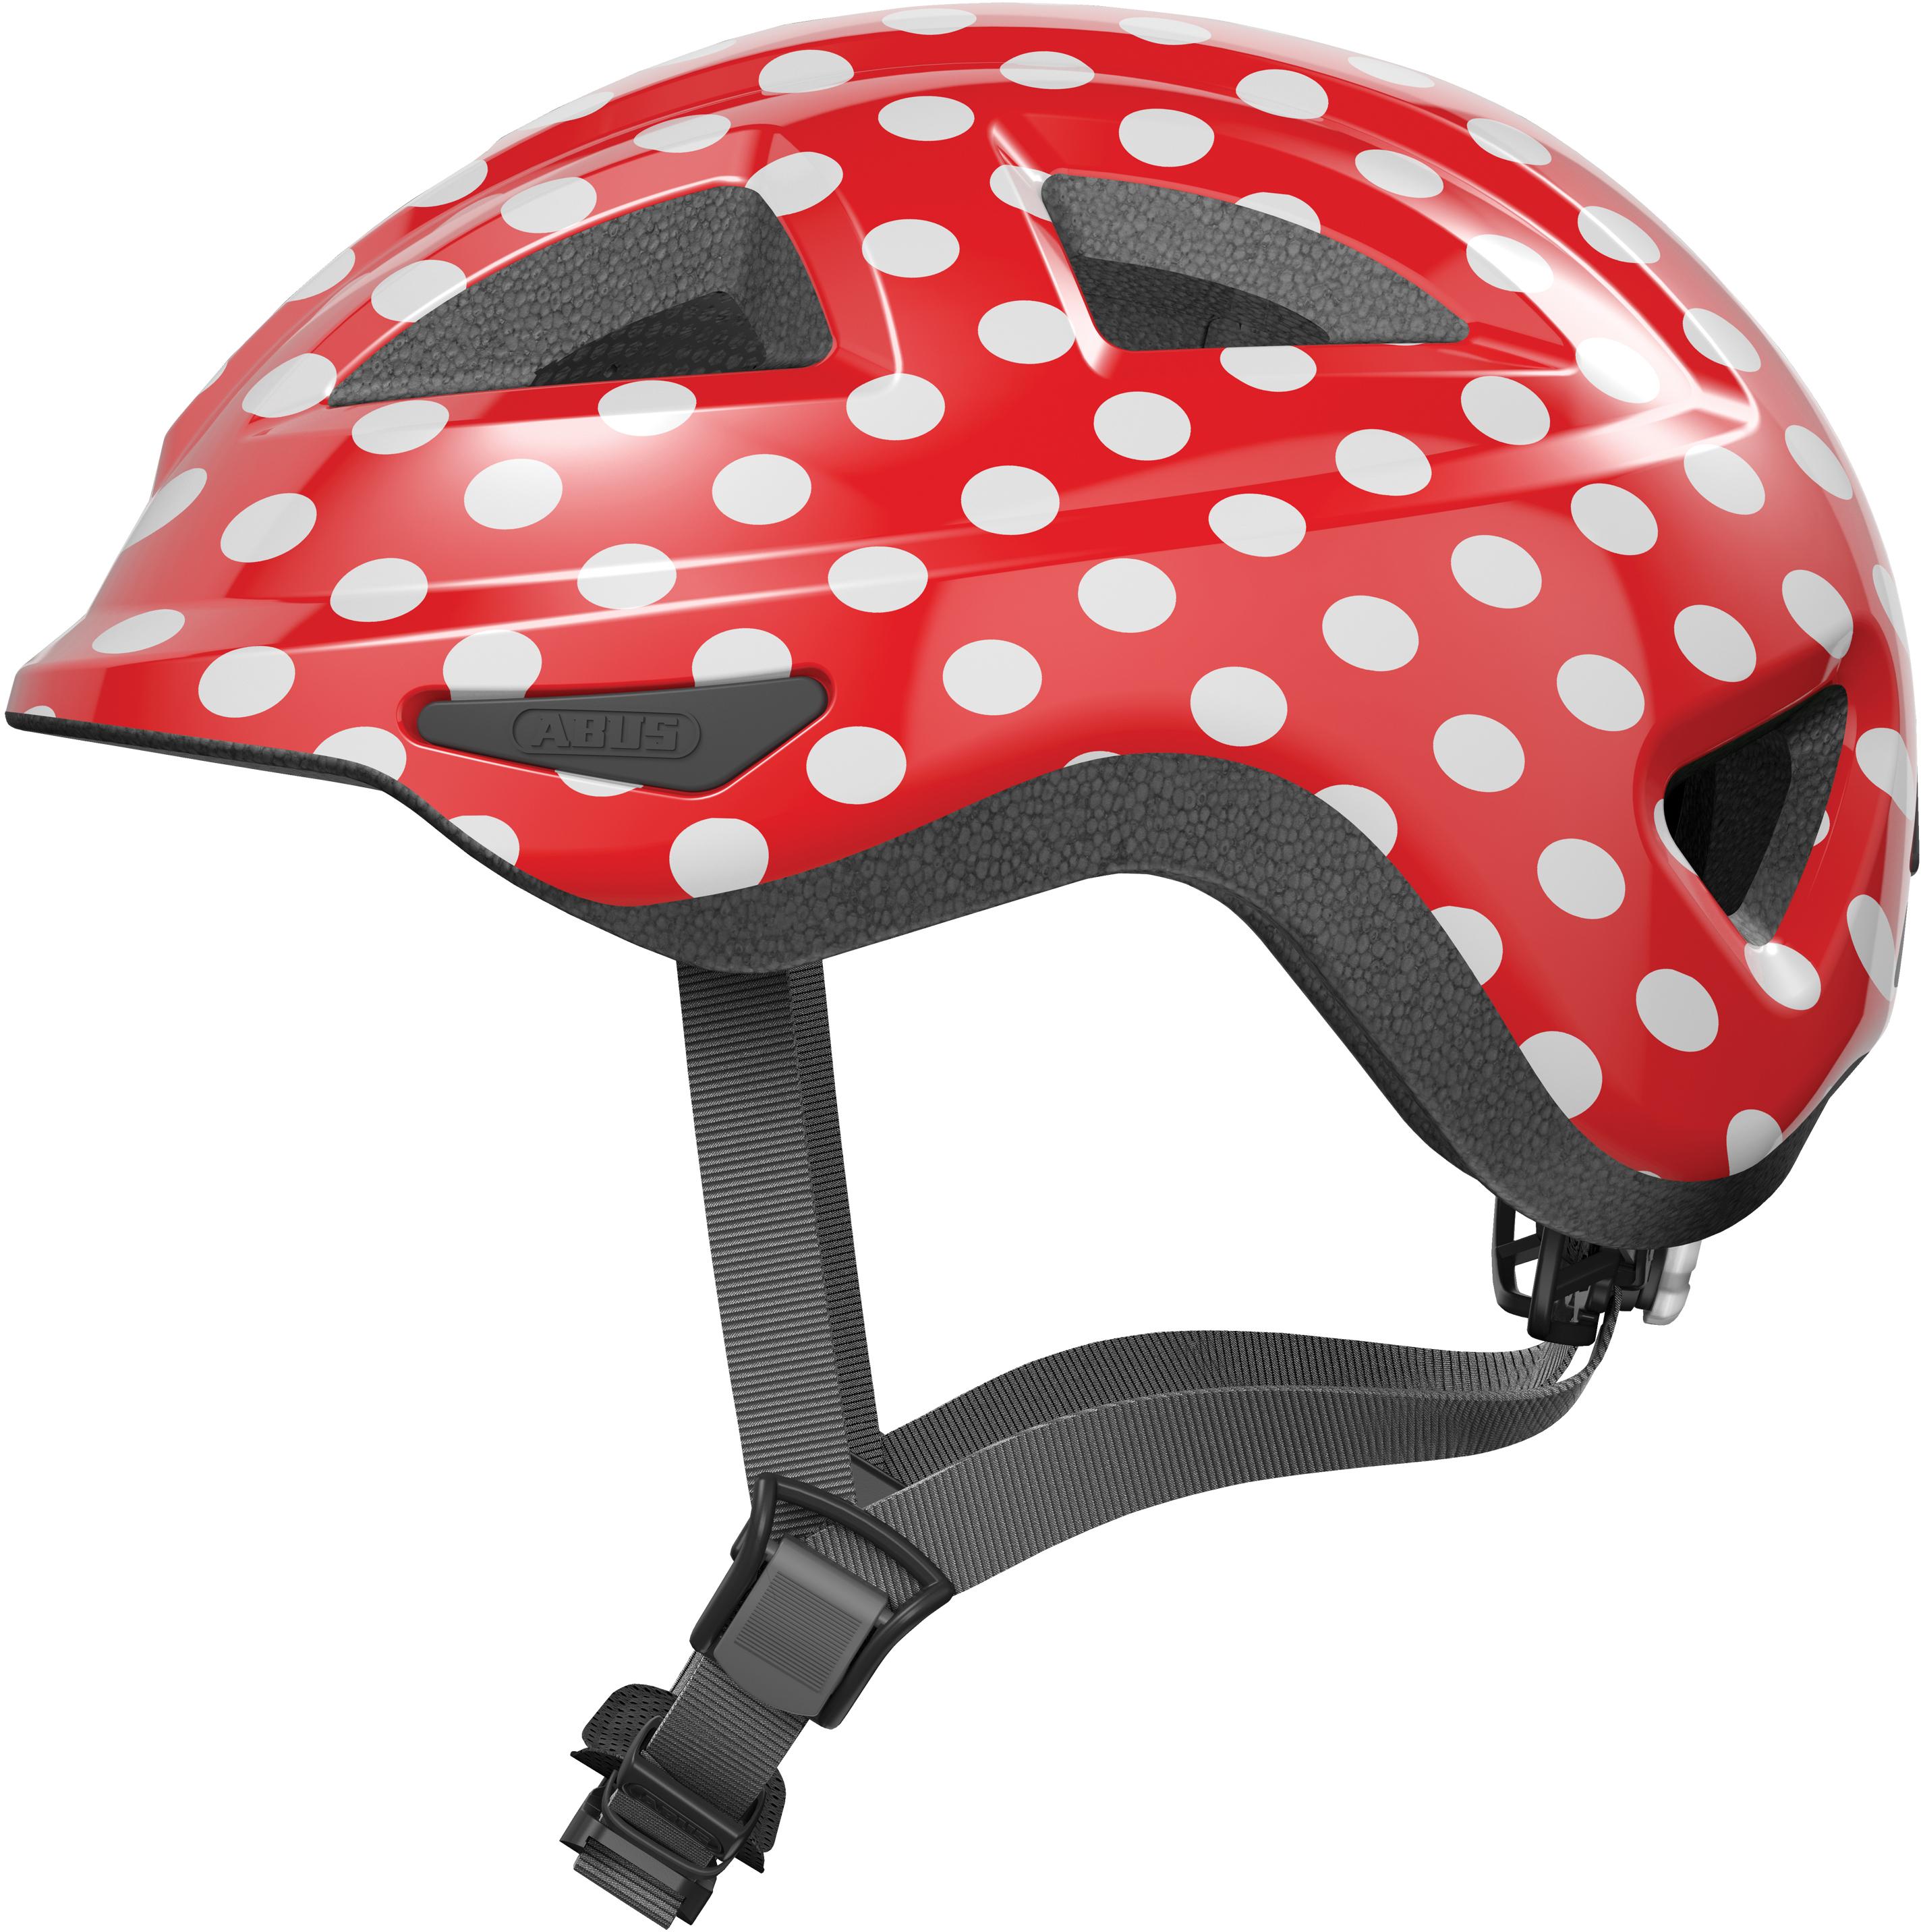 Abus Anuky 2.0 Helmet, Red Spots Small